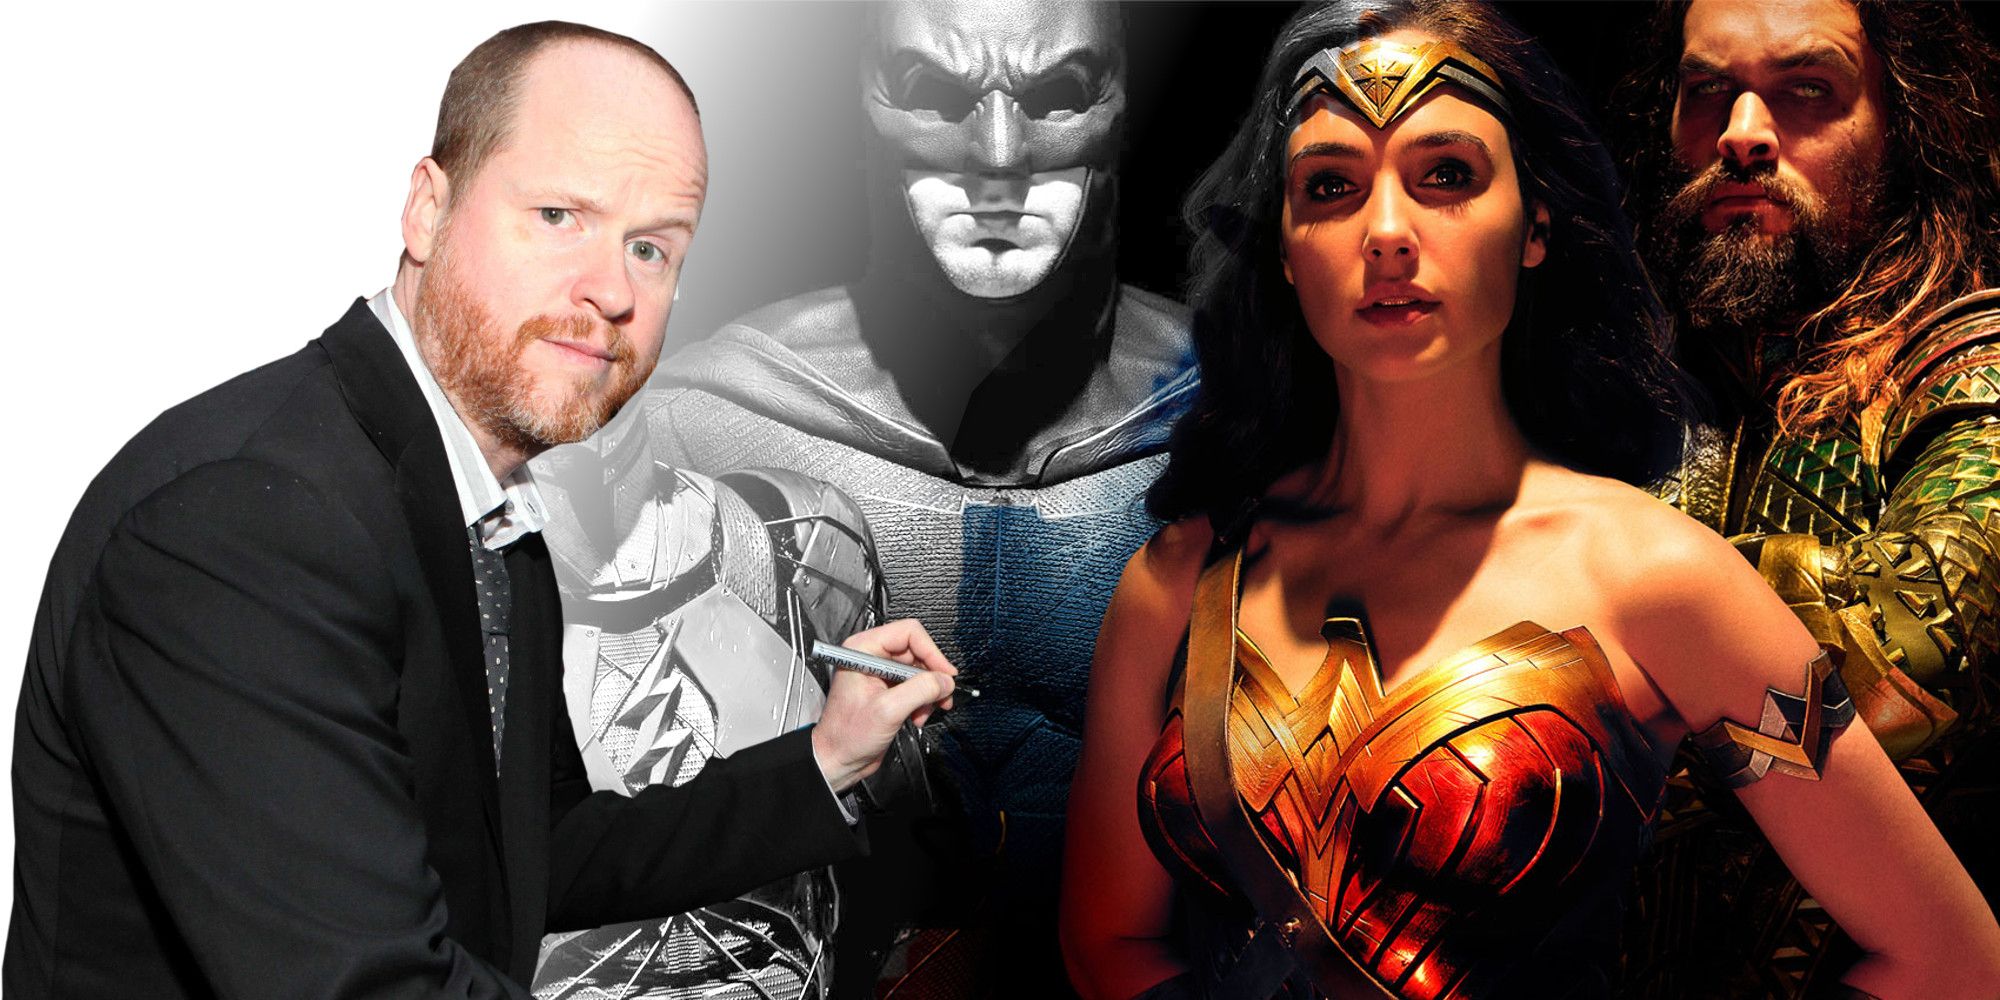 Justice League’s Gal Gadot Confirms She Had An On-Set Issue With Joss Whedon